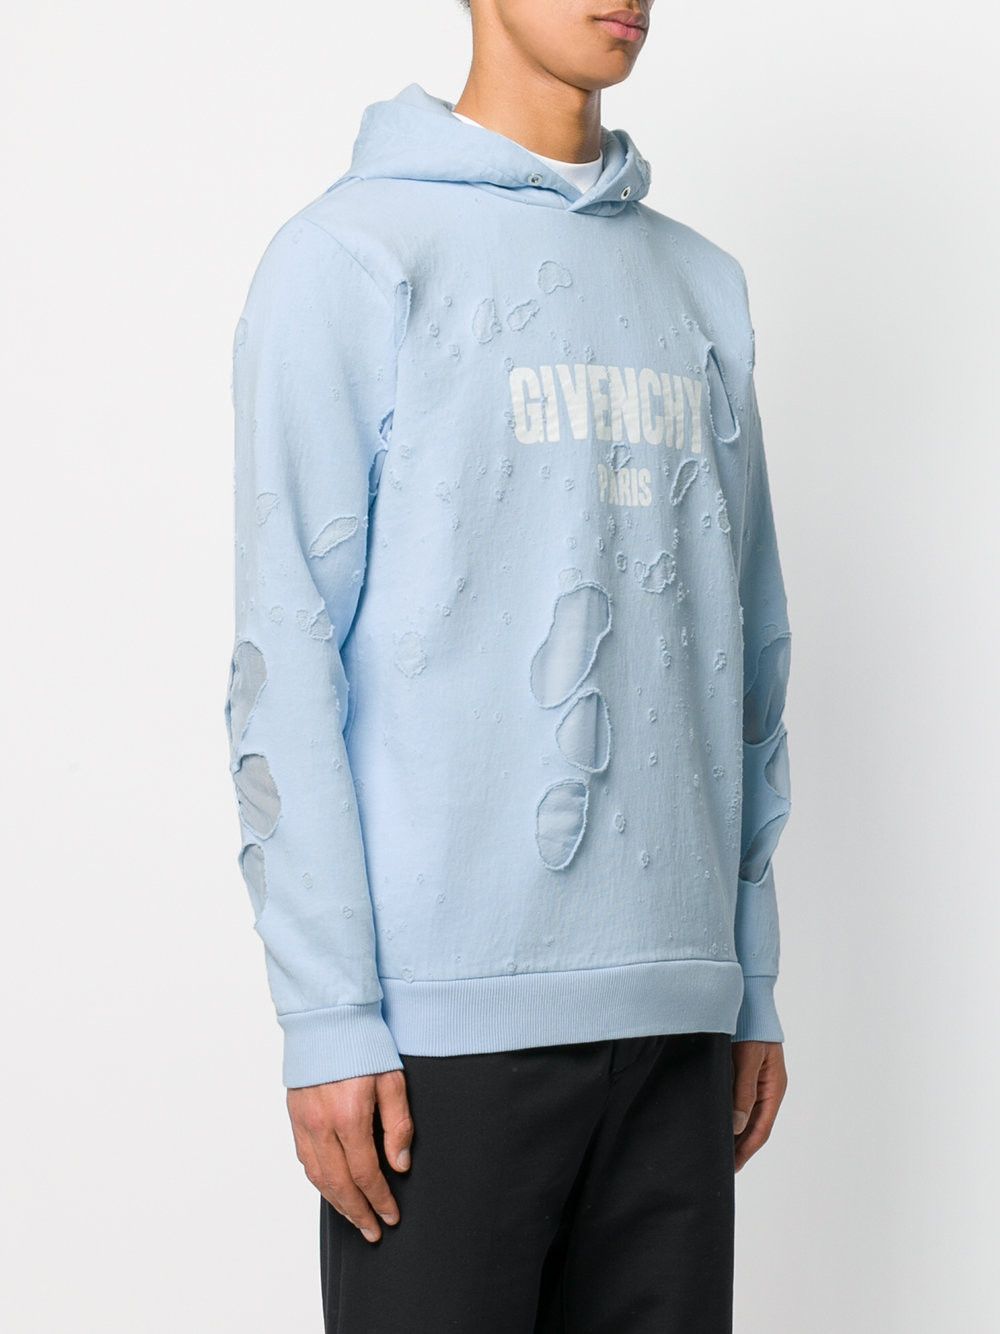 Givenchy $1500 Givenchy Baby Blue Destroyed Distressed Logo Rottweiler Shark Hoodie size M Size US M / EU 48-50 / 2 - 3 Thumbnail